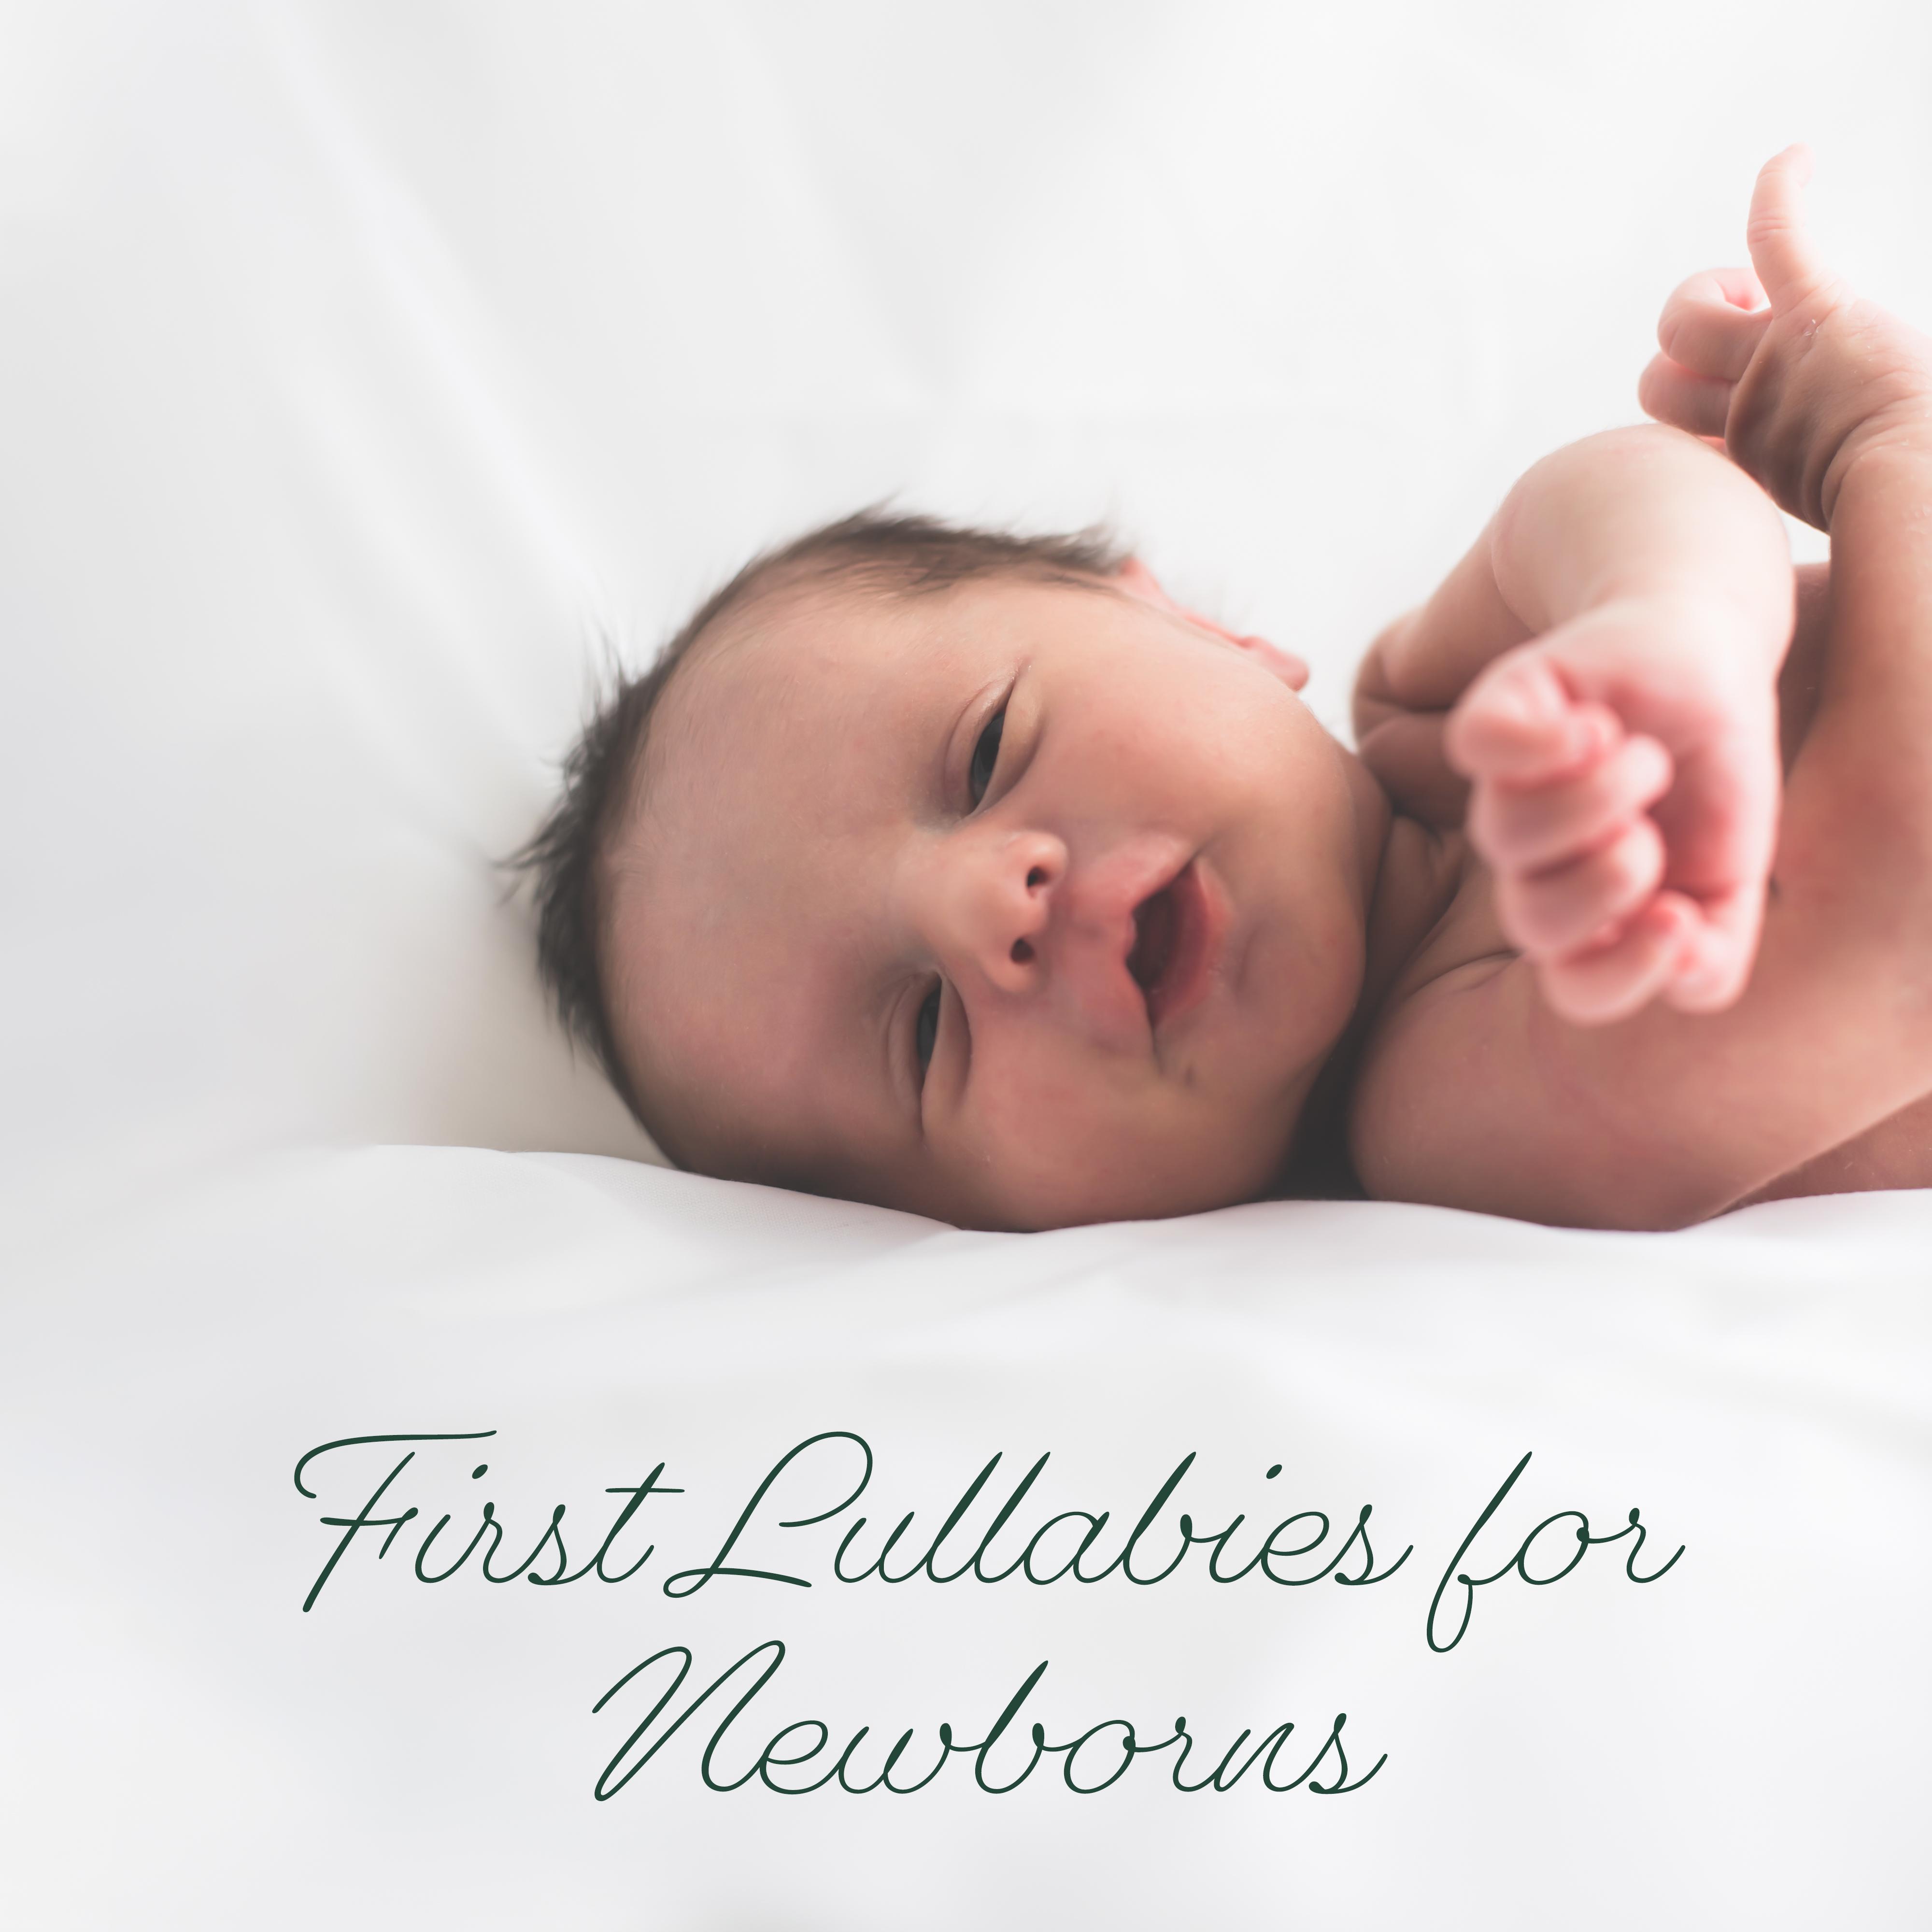 First Lullabies for Newborns - Subtle, Quiet and Gentle Music for Infants